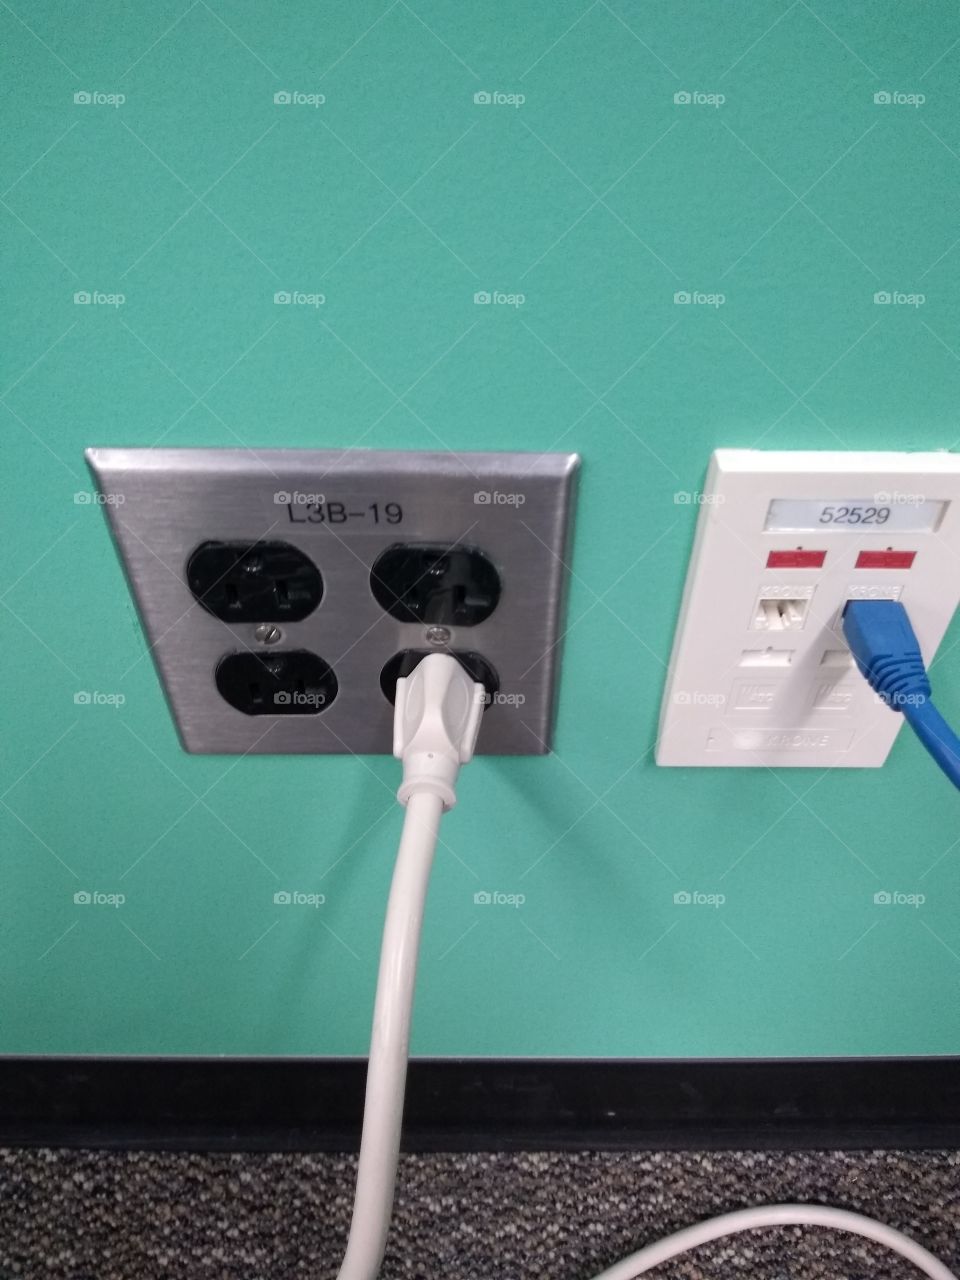 electrical and network outlets